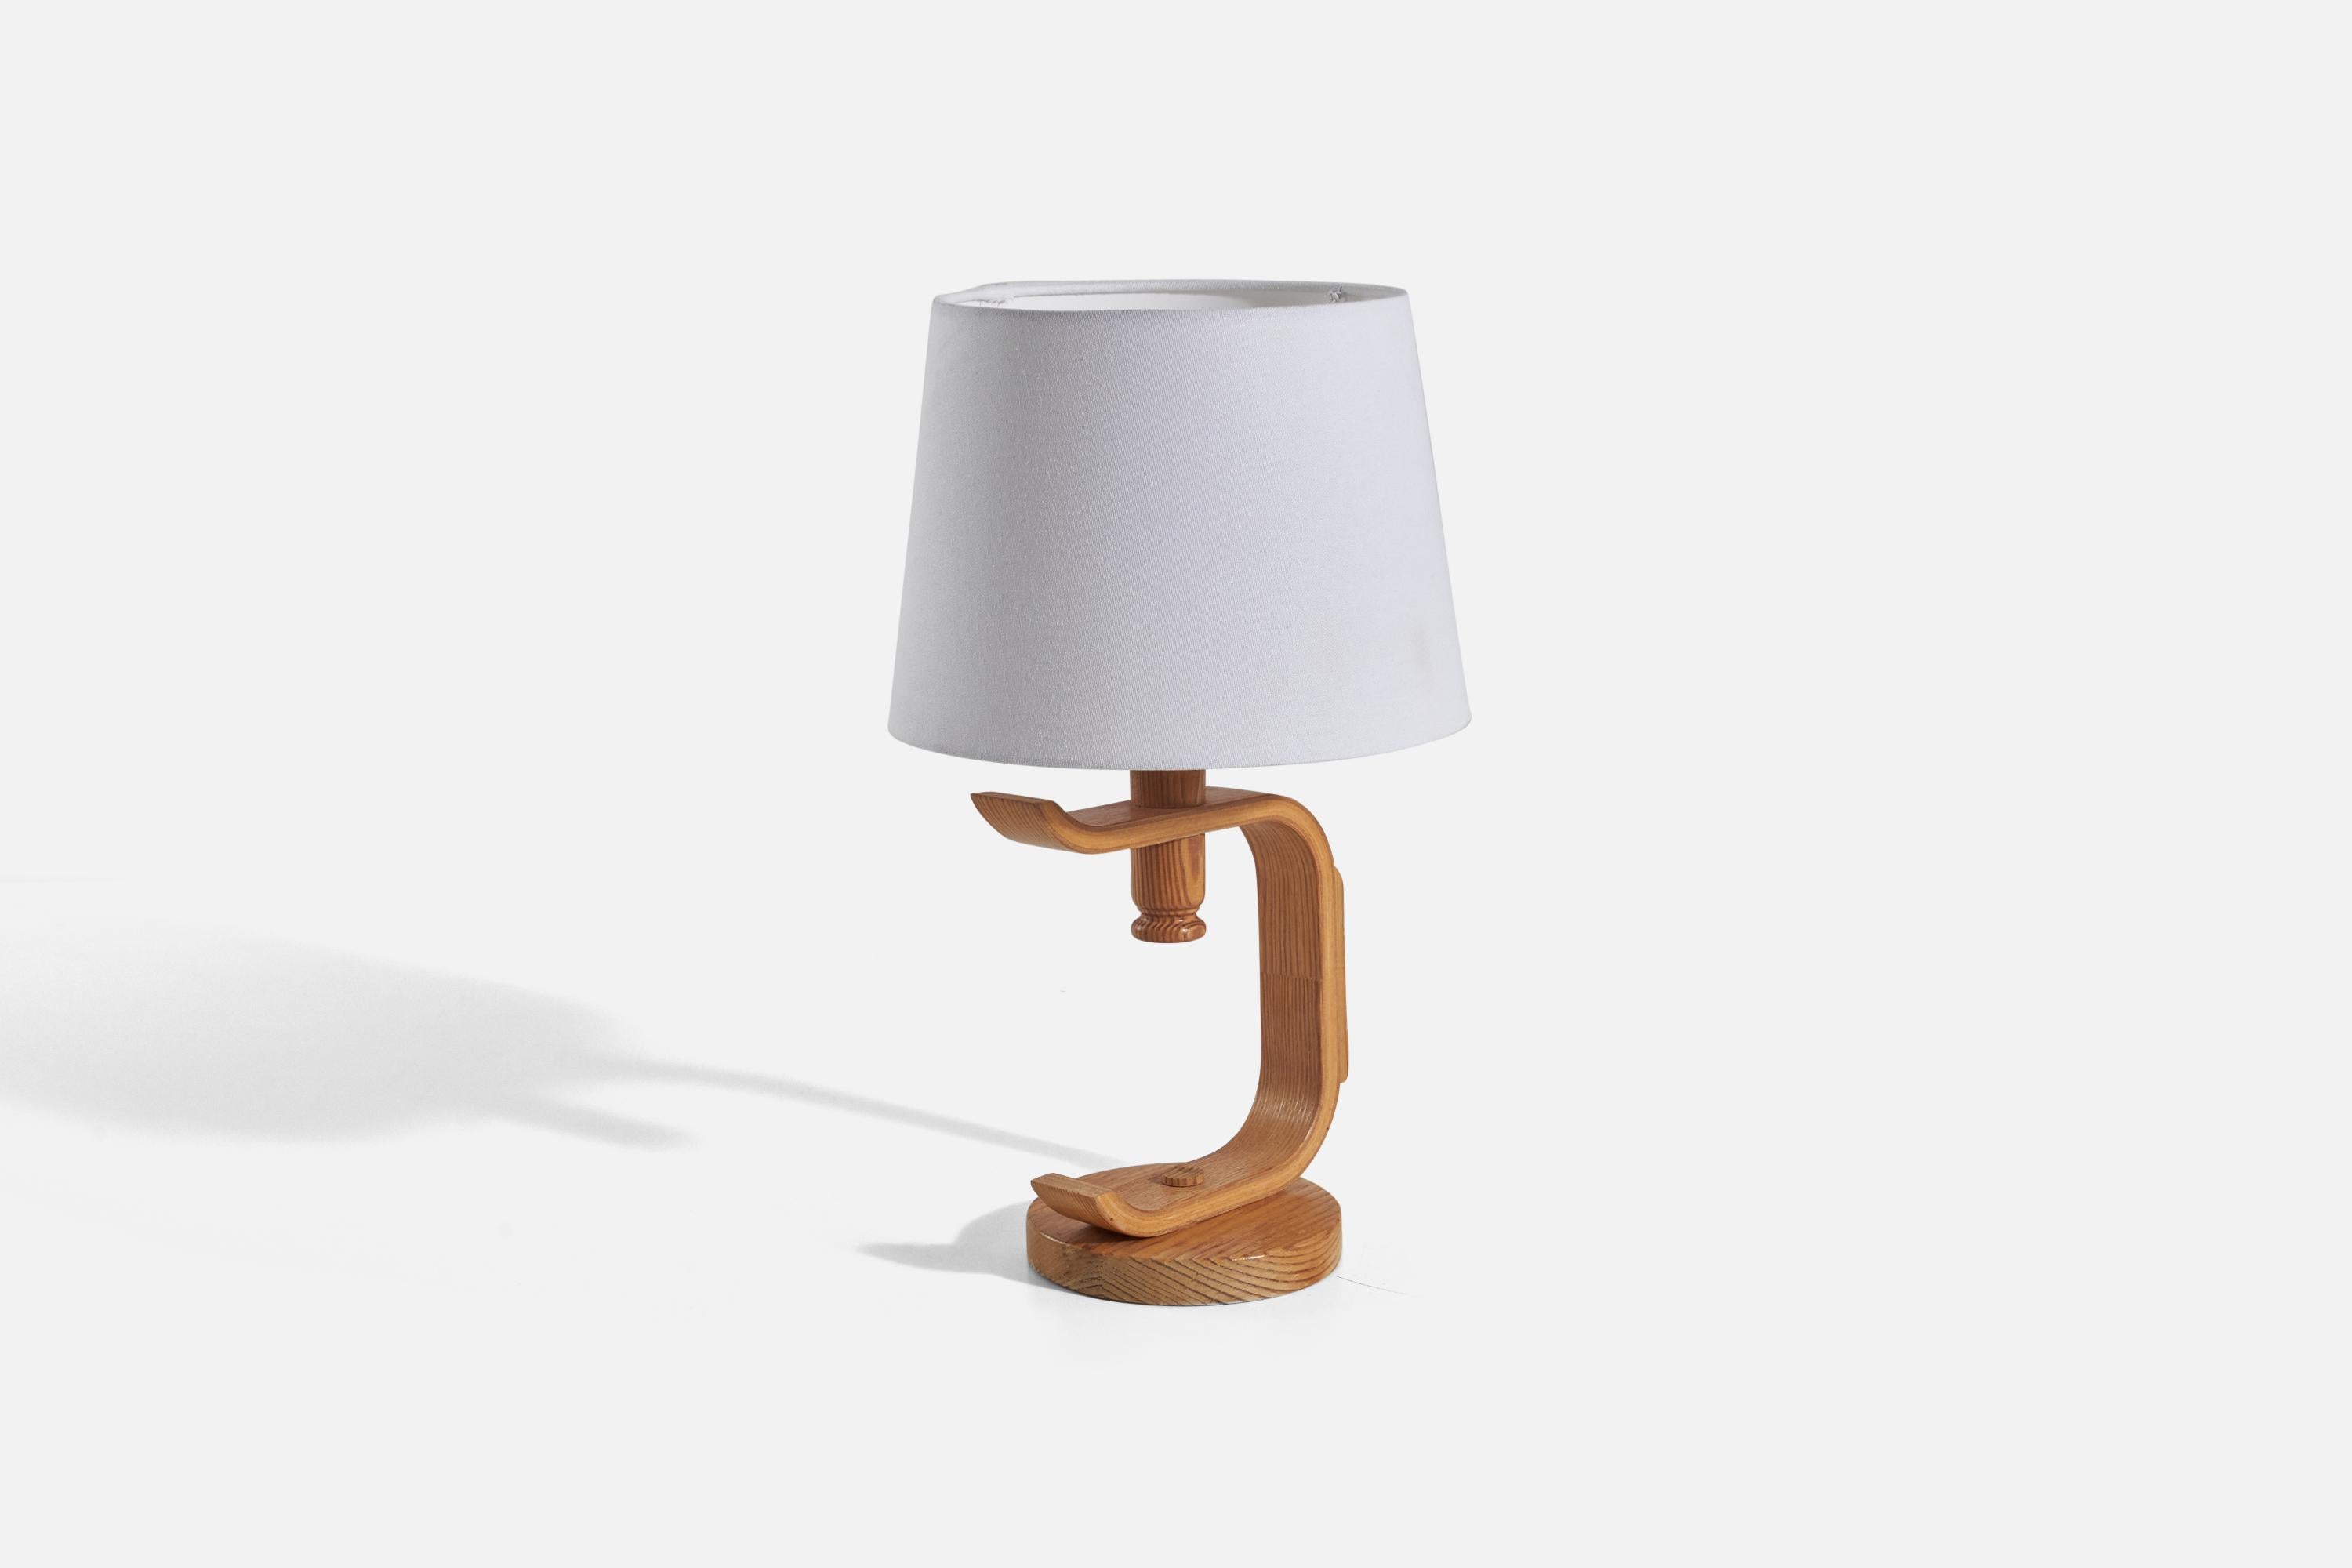 A pine table lamp designed and produced in Sweden, 1970s.

Sold without lampshade(s)
Dimensions of lamp (inches) : 11.81 x 5.51 x 7.56 (Height x Width x Depth)
Dimensions of shade (inches) : 8 x 10 x 7.5 (Top Diameter x Bottom Diameter x